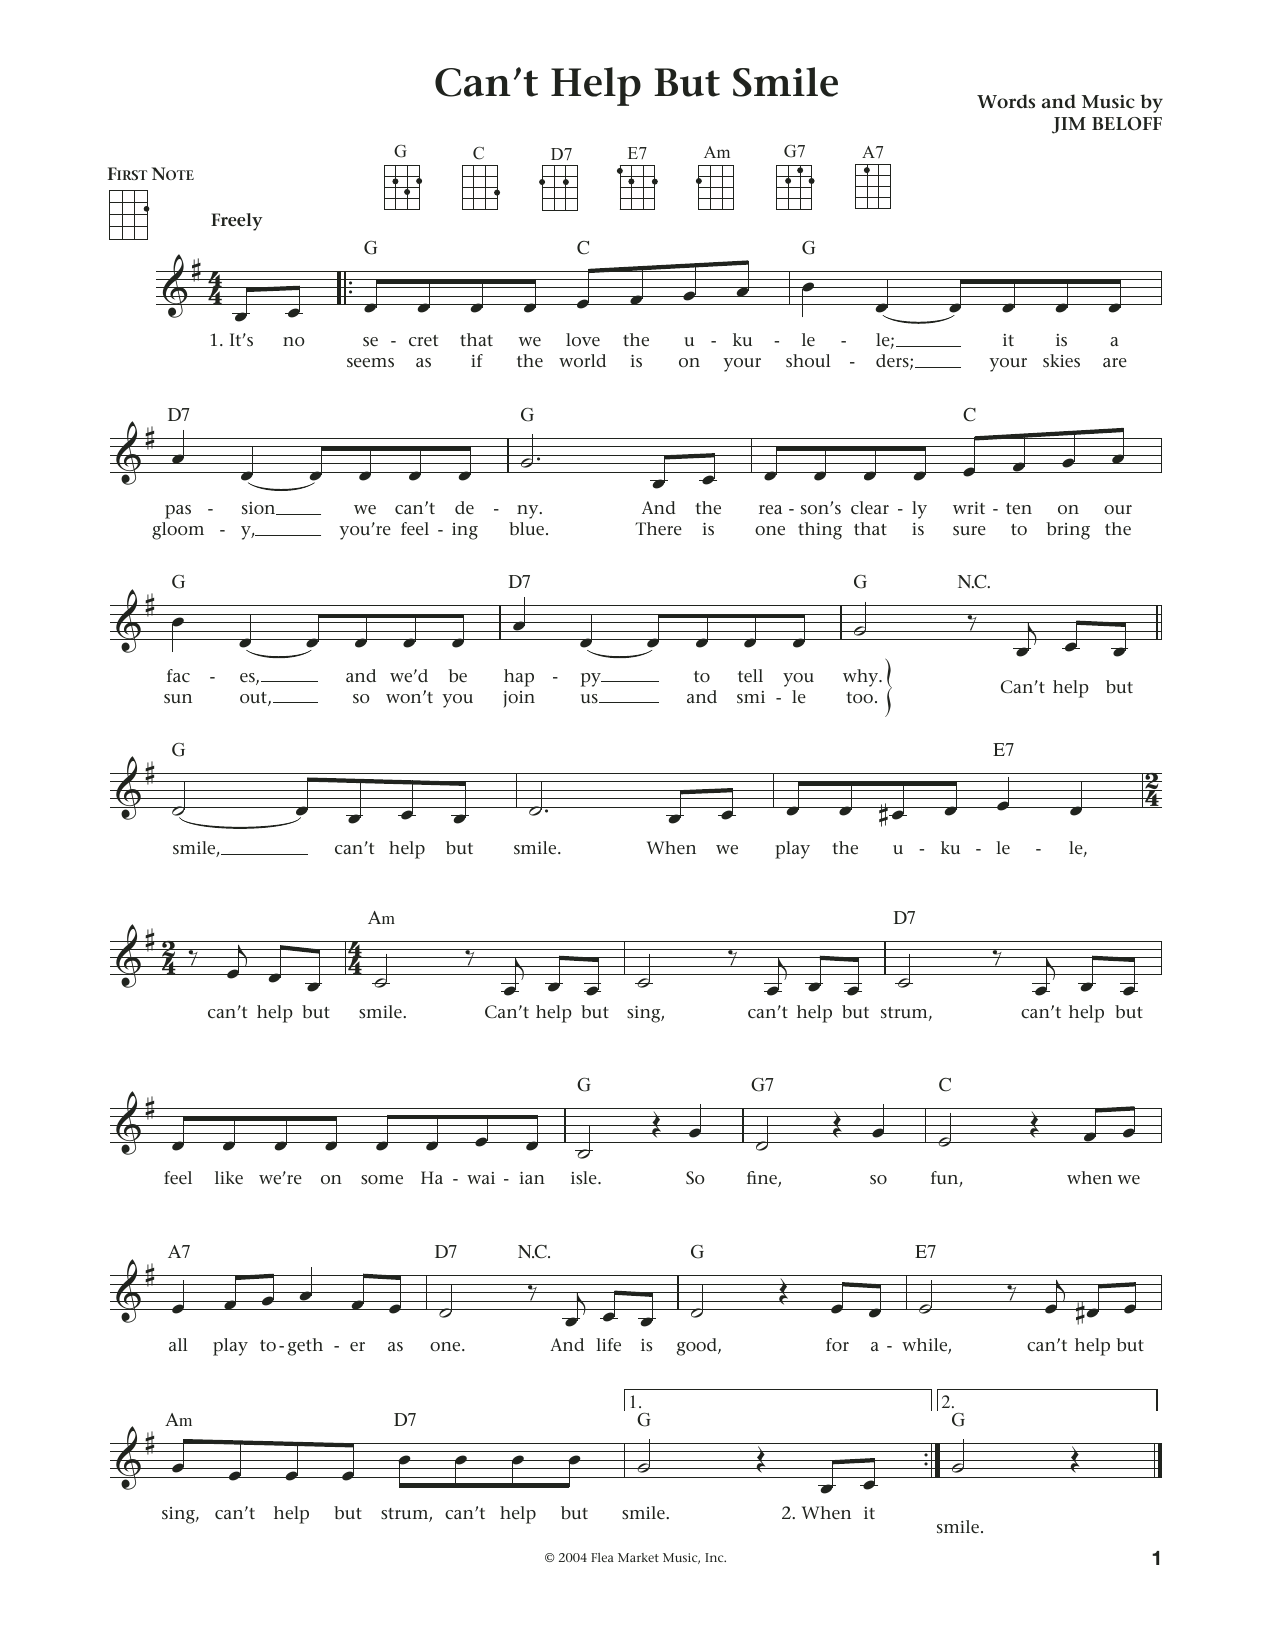 Download Liz and Jim Beloff Can't Help But Smile (from The Daily Uk Sheet Music